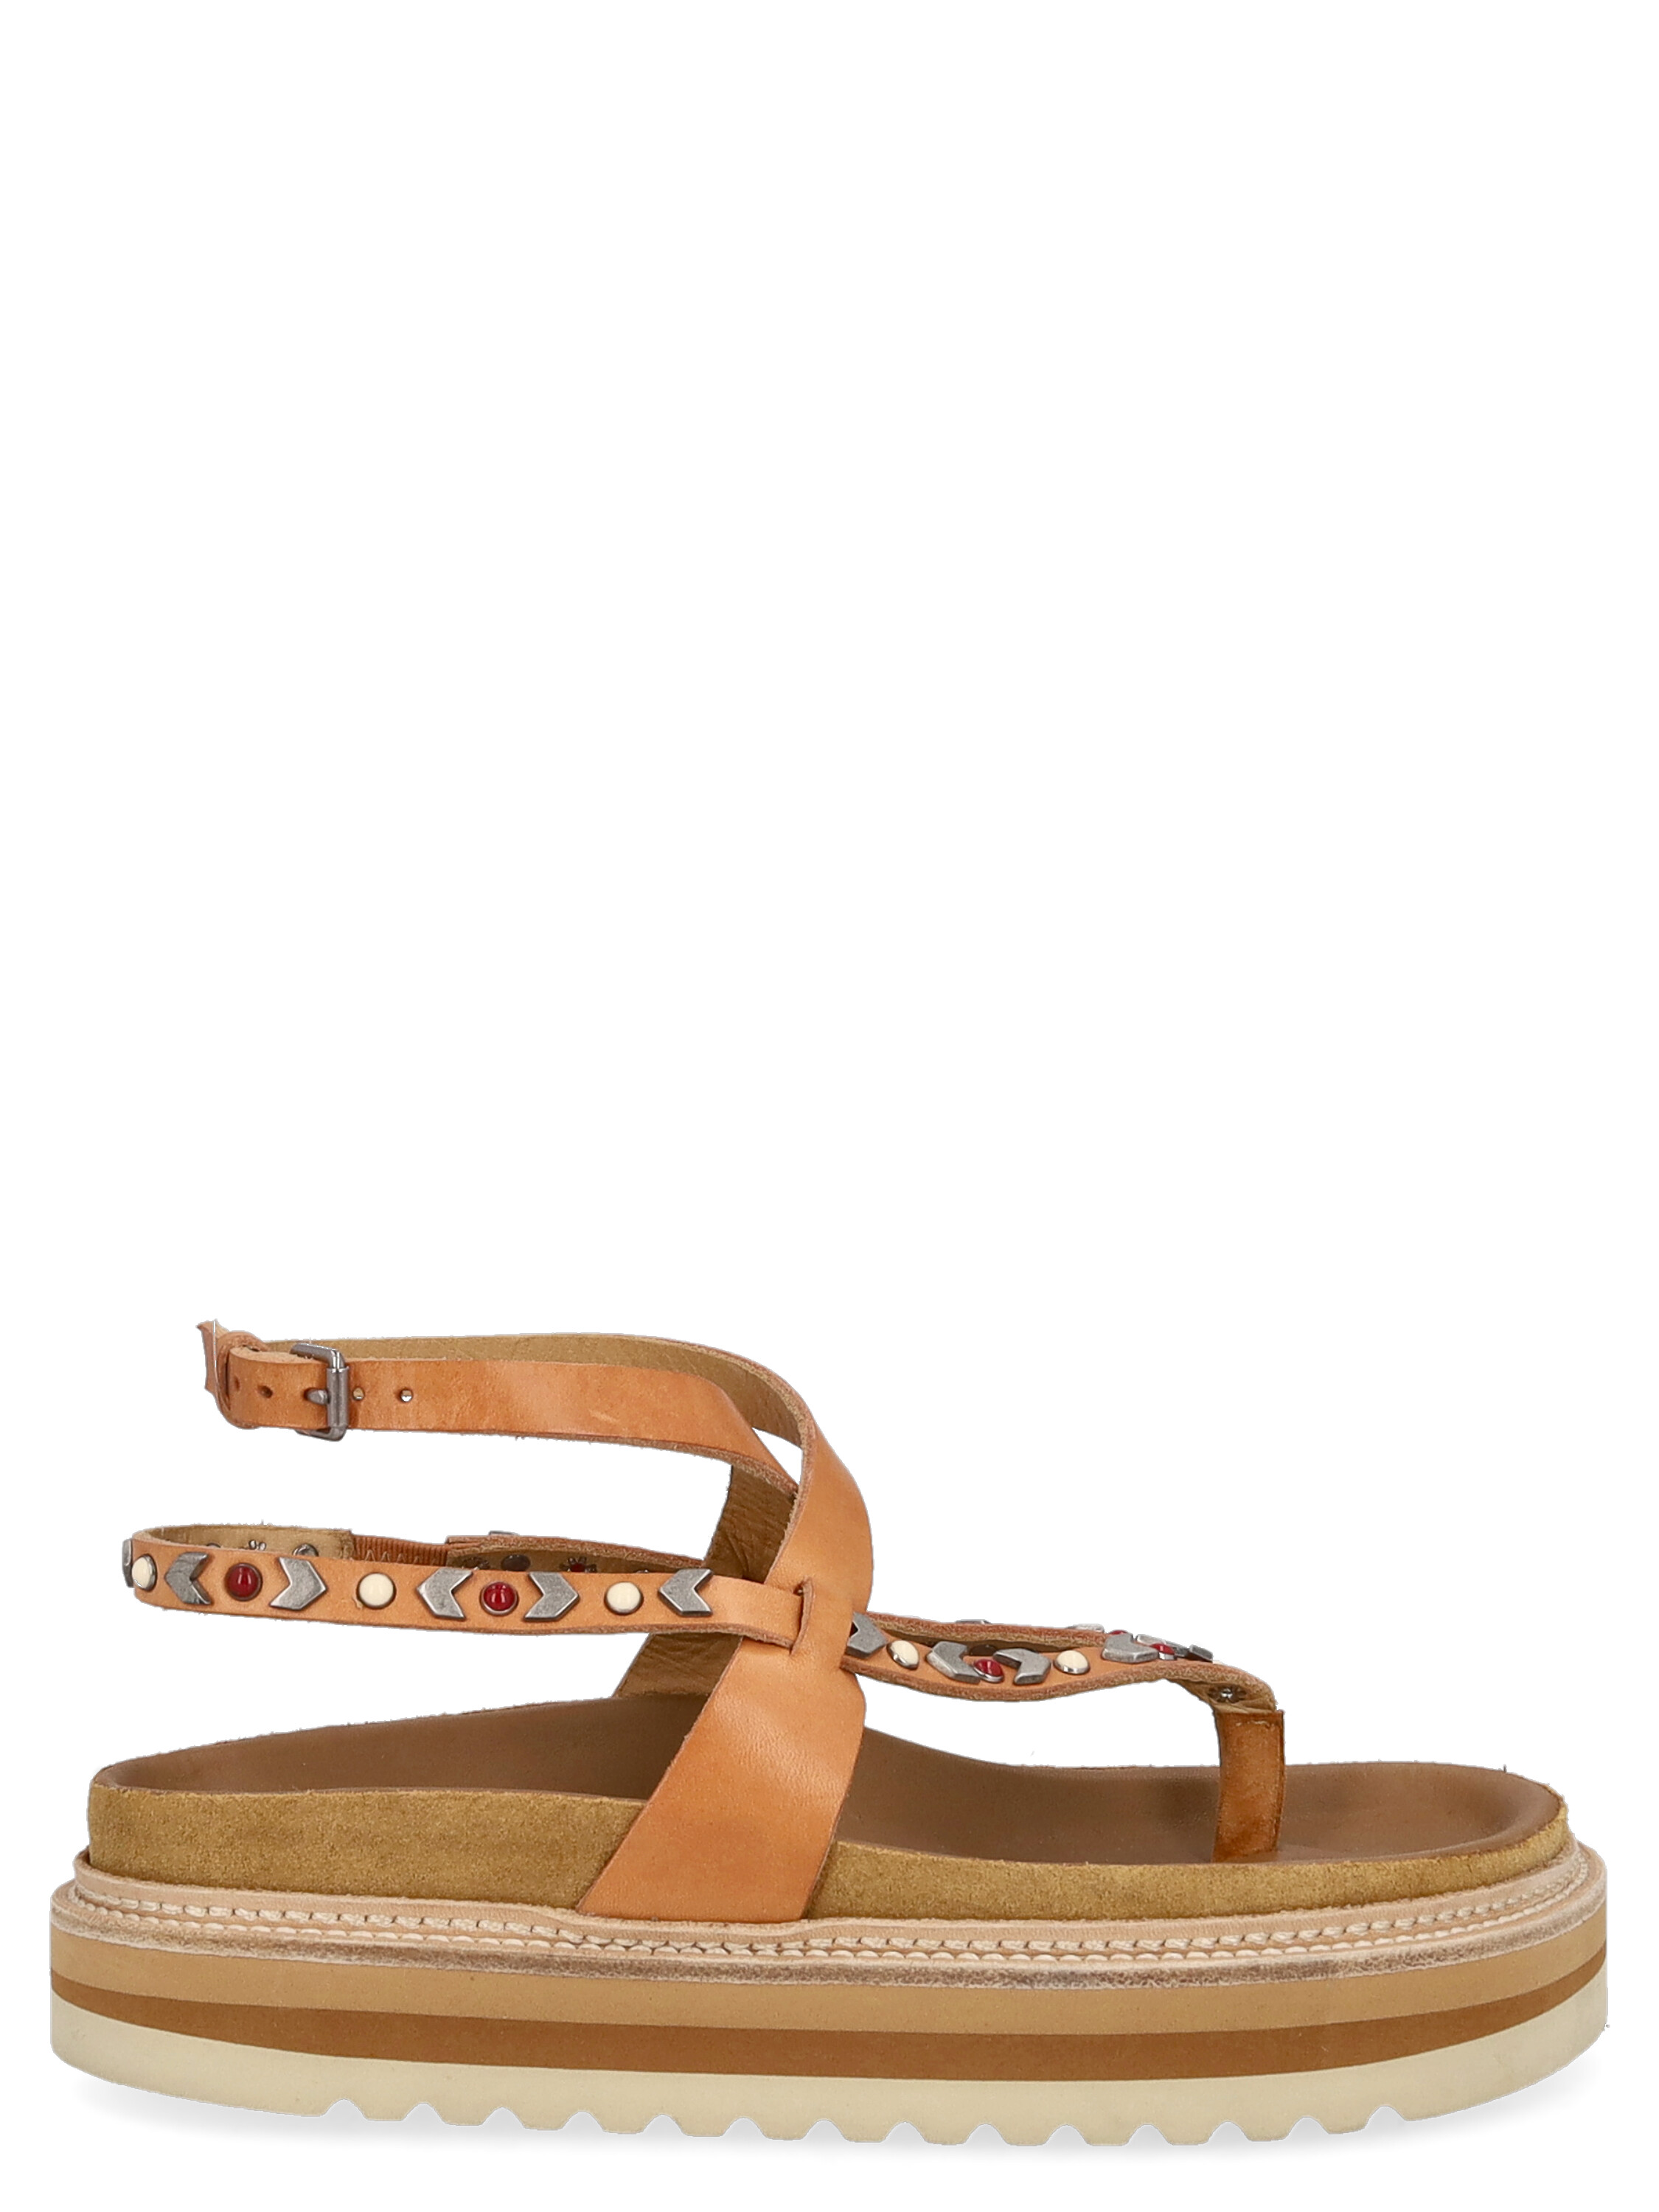 Pre-owned Isabel Marant Women's Sandals -  - In Camel Color It 38